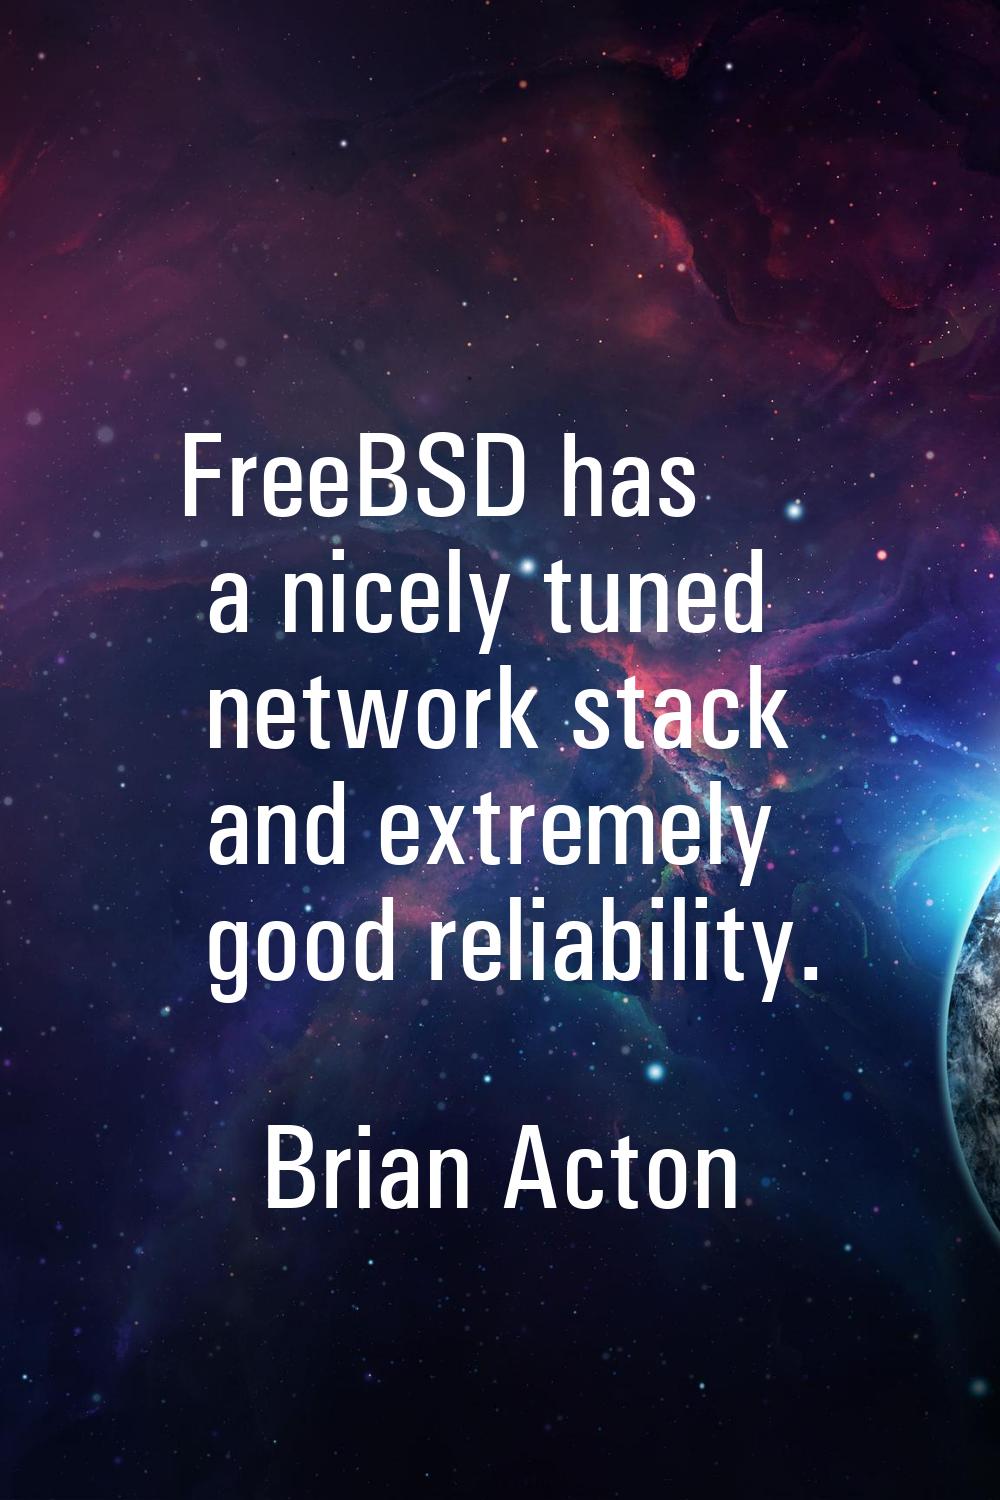 FreeBSD has a nicely tuned network stack and extremely good reliability.